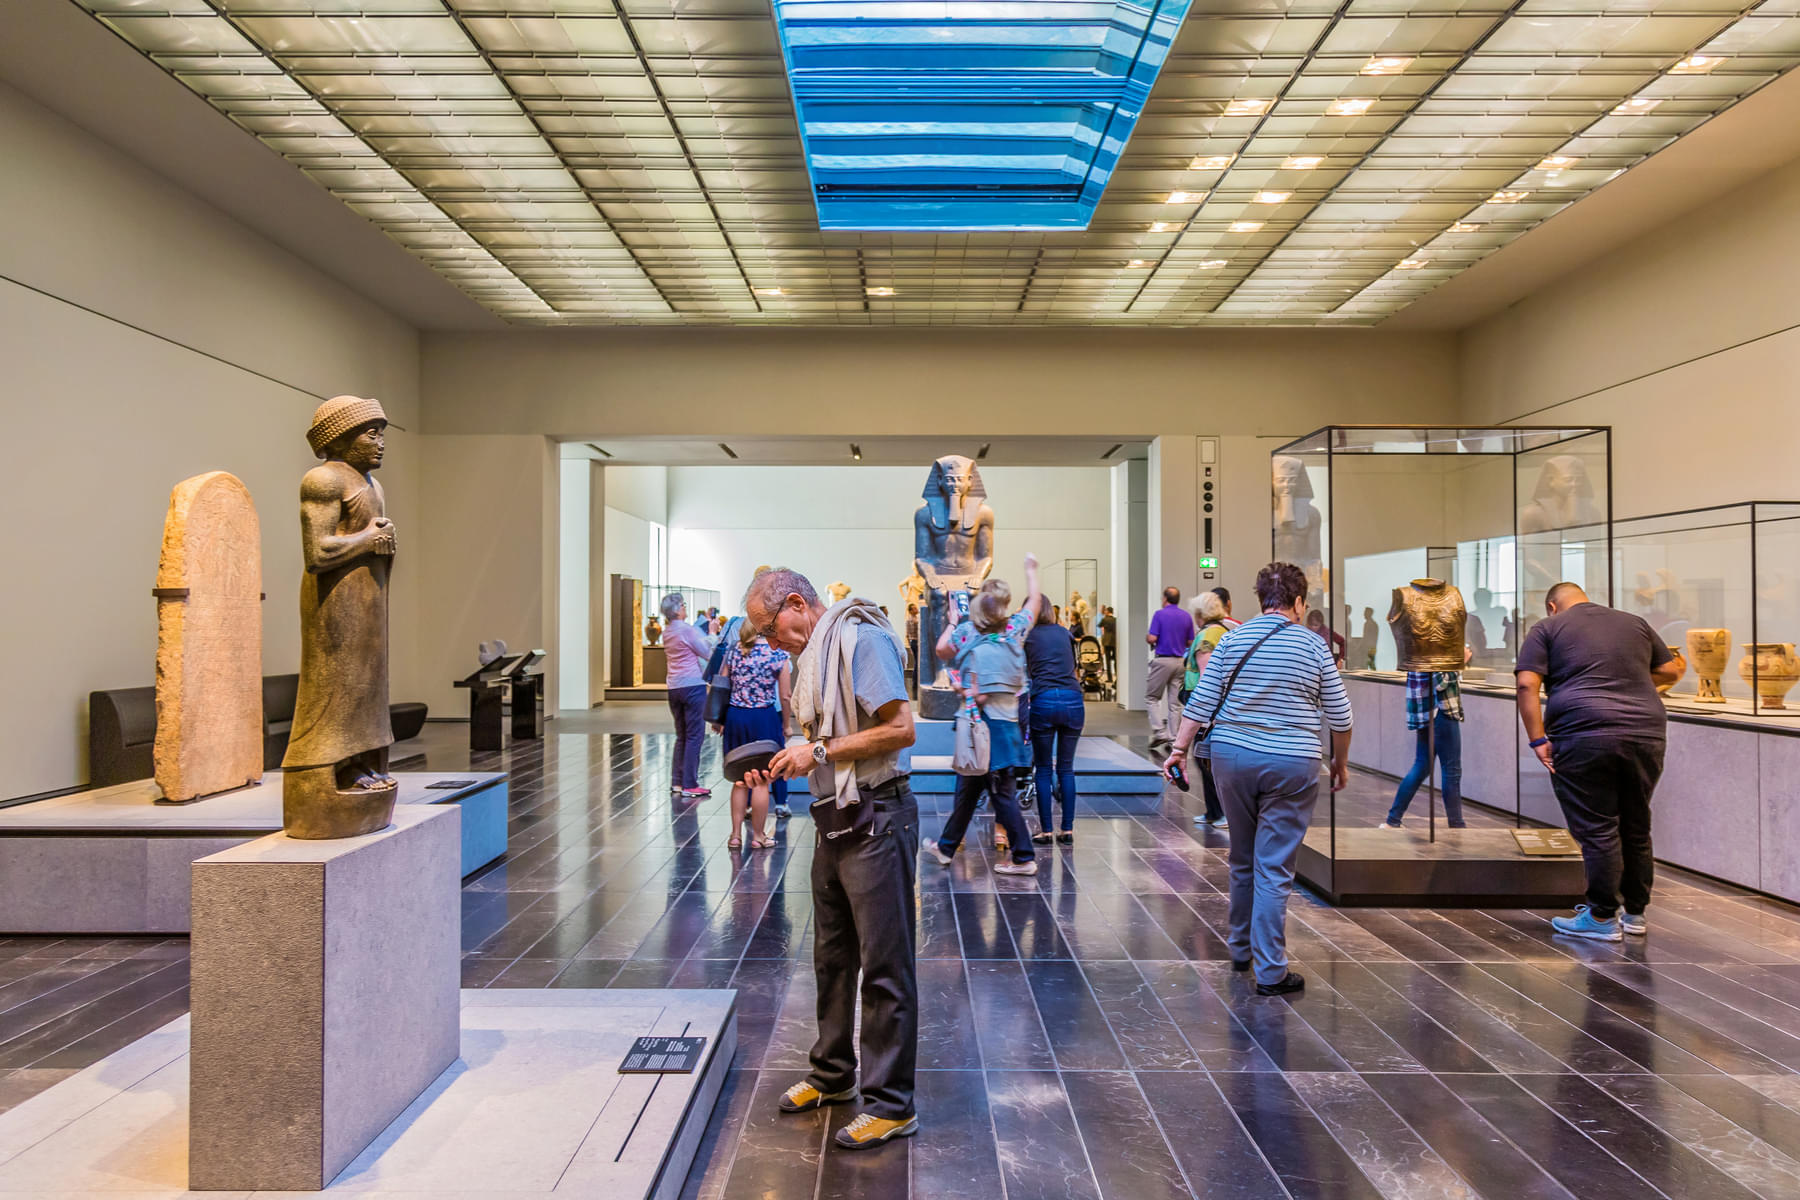 Explore 12 galleries and marvel at the largest collection of ancient artwork